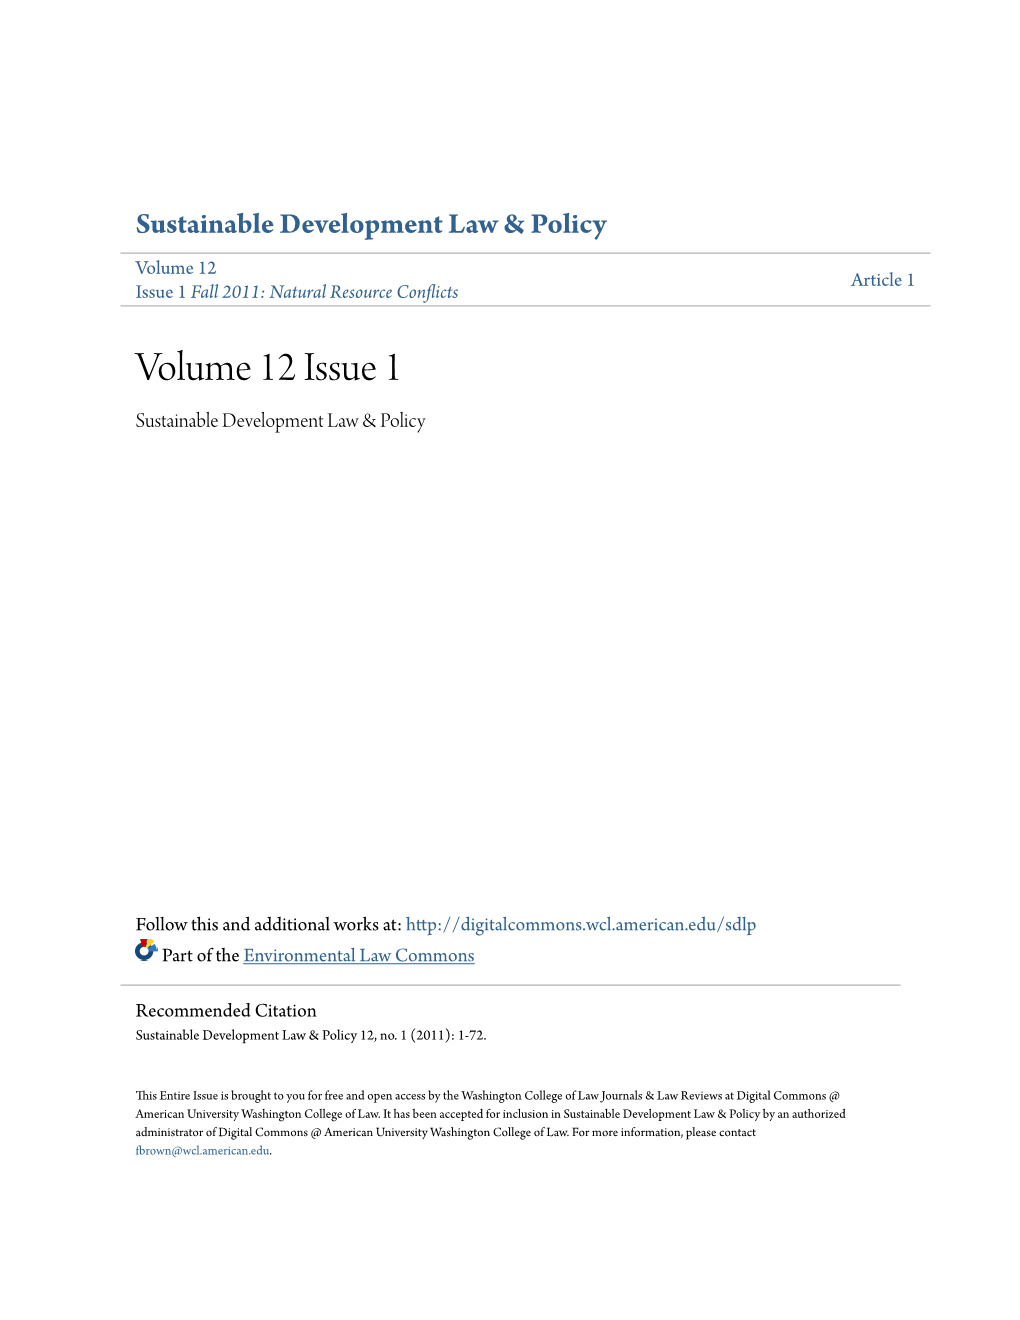 Volume 12 Issue 1 Sustainable Development Law & Policy